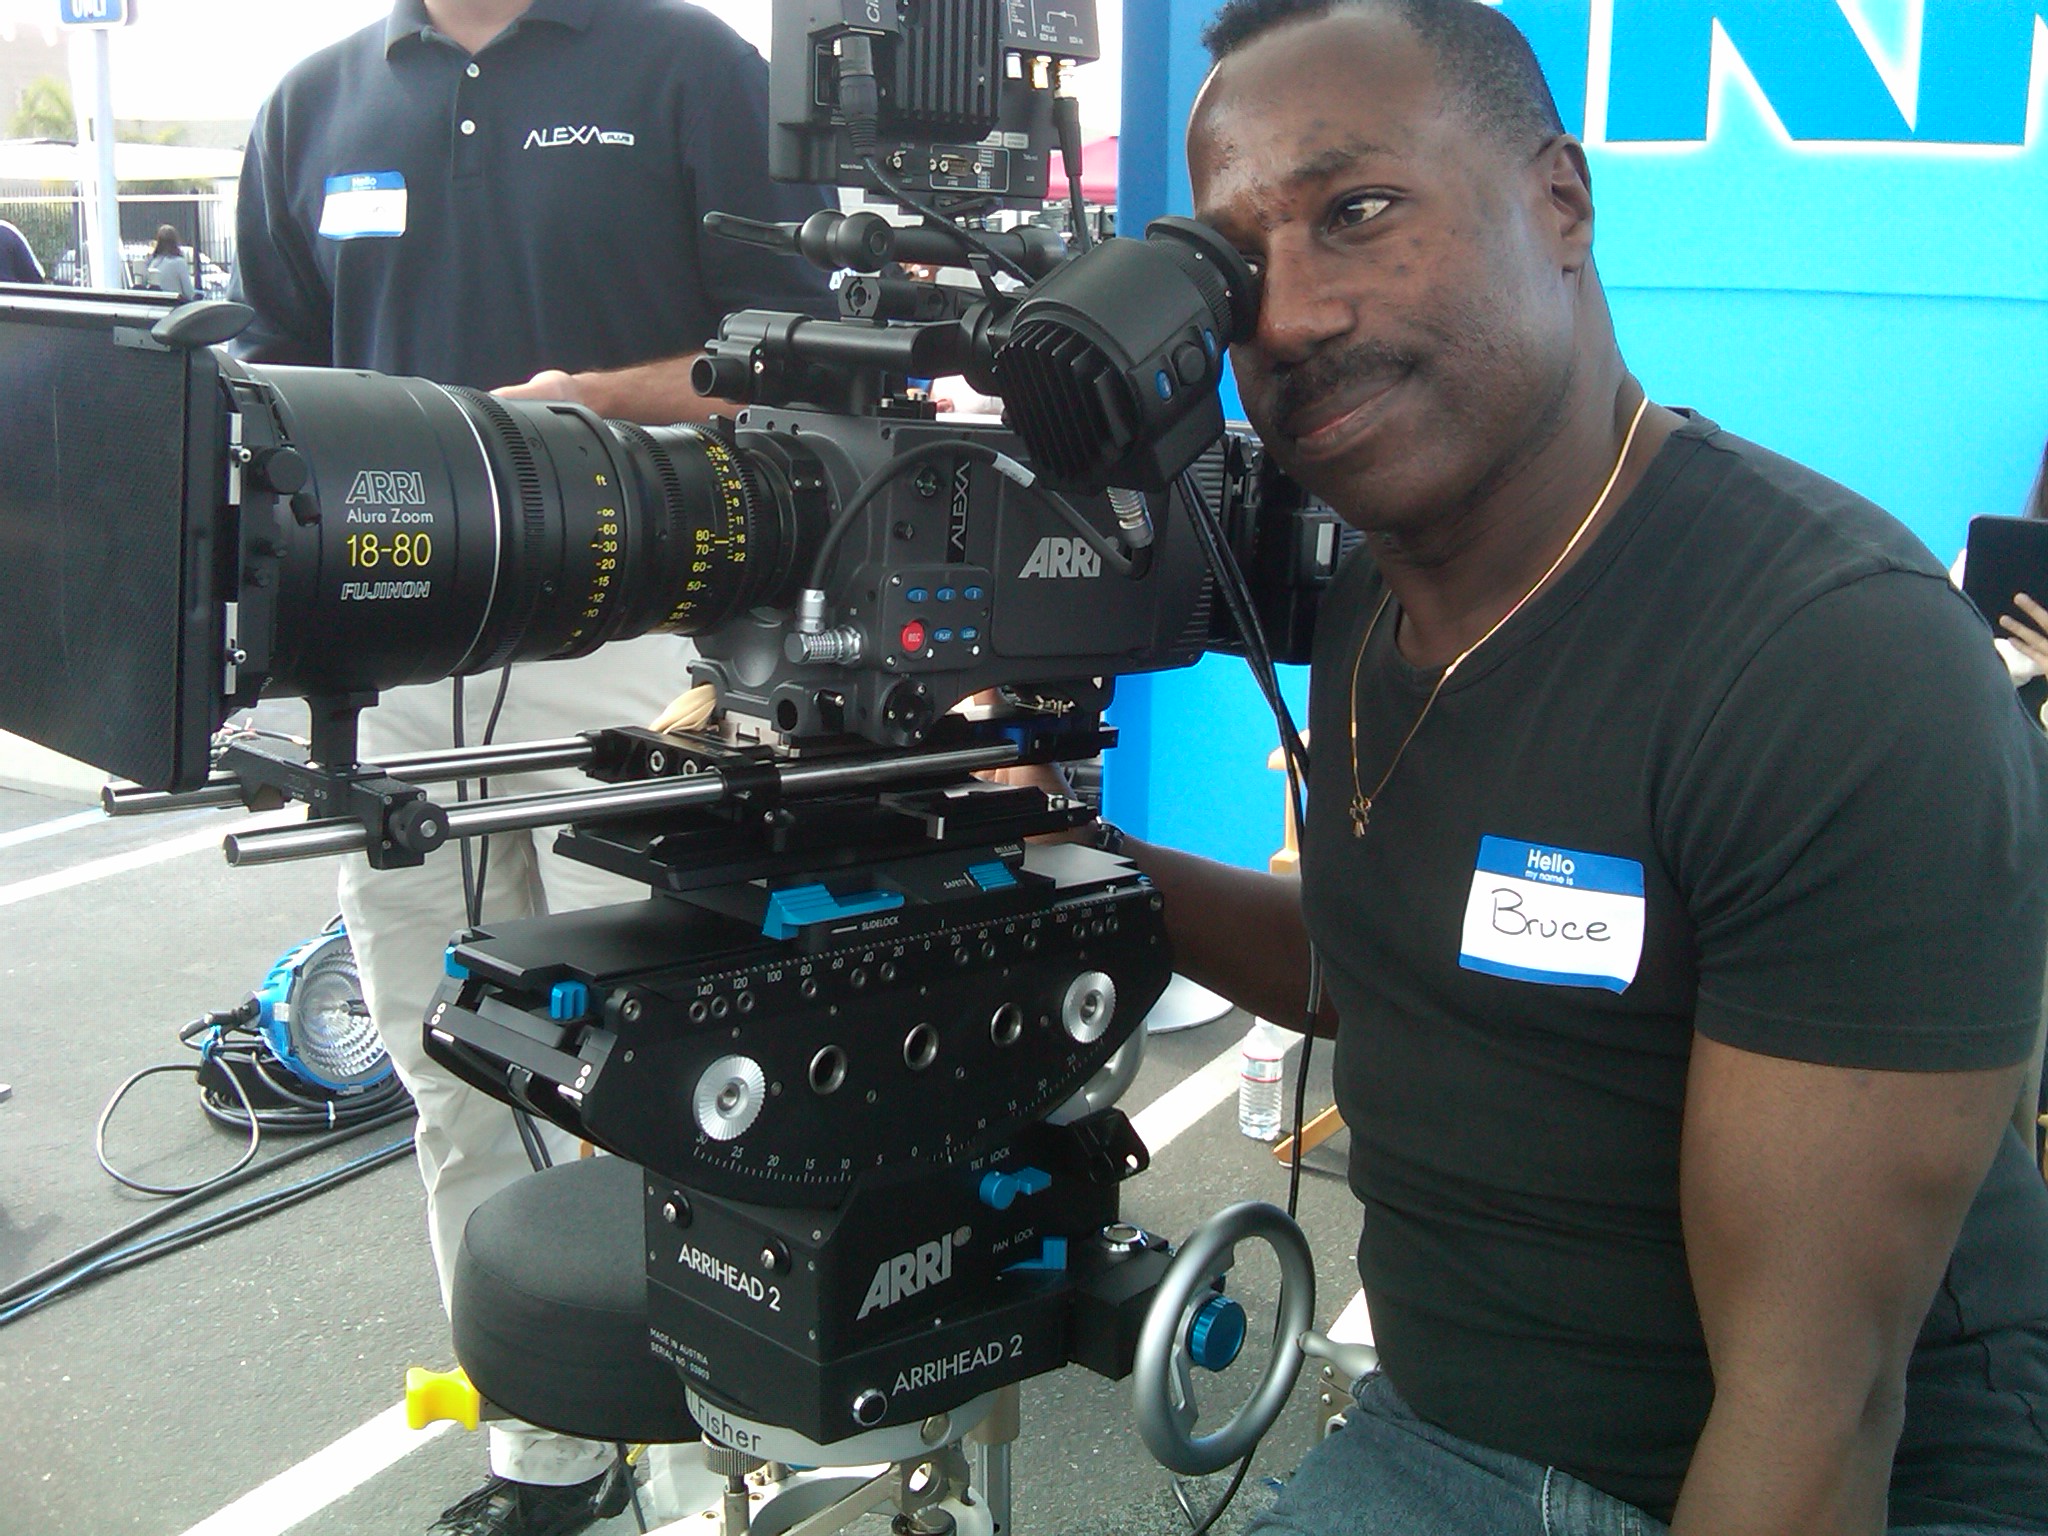 Bruce B. Gordon examining monitoring on an ARRI Alexa camera at a J. L. Fisher event for the Society of Camera Operators (SOC), International Cinematographers Guild (ICG) and American Society of Cinematographers (ASC).